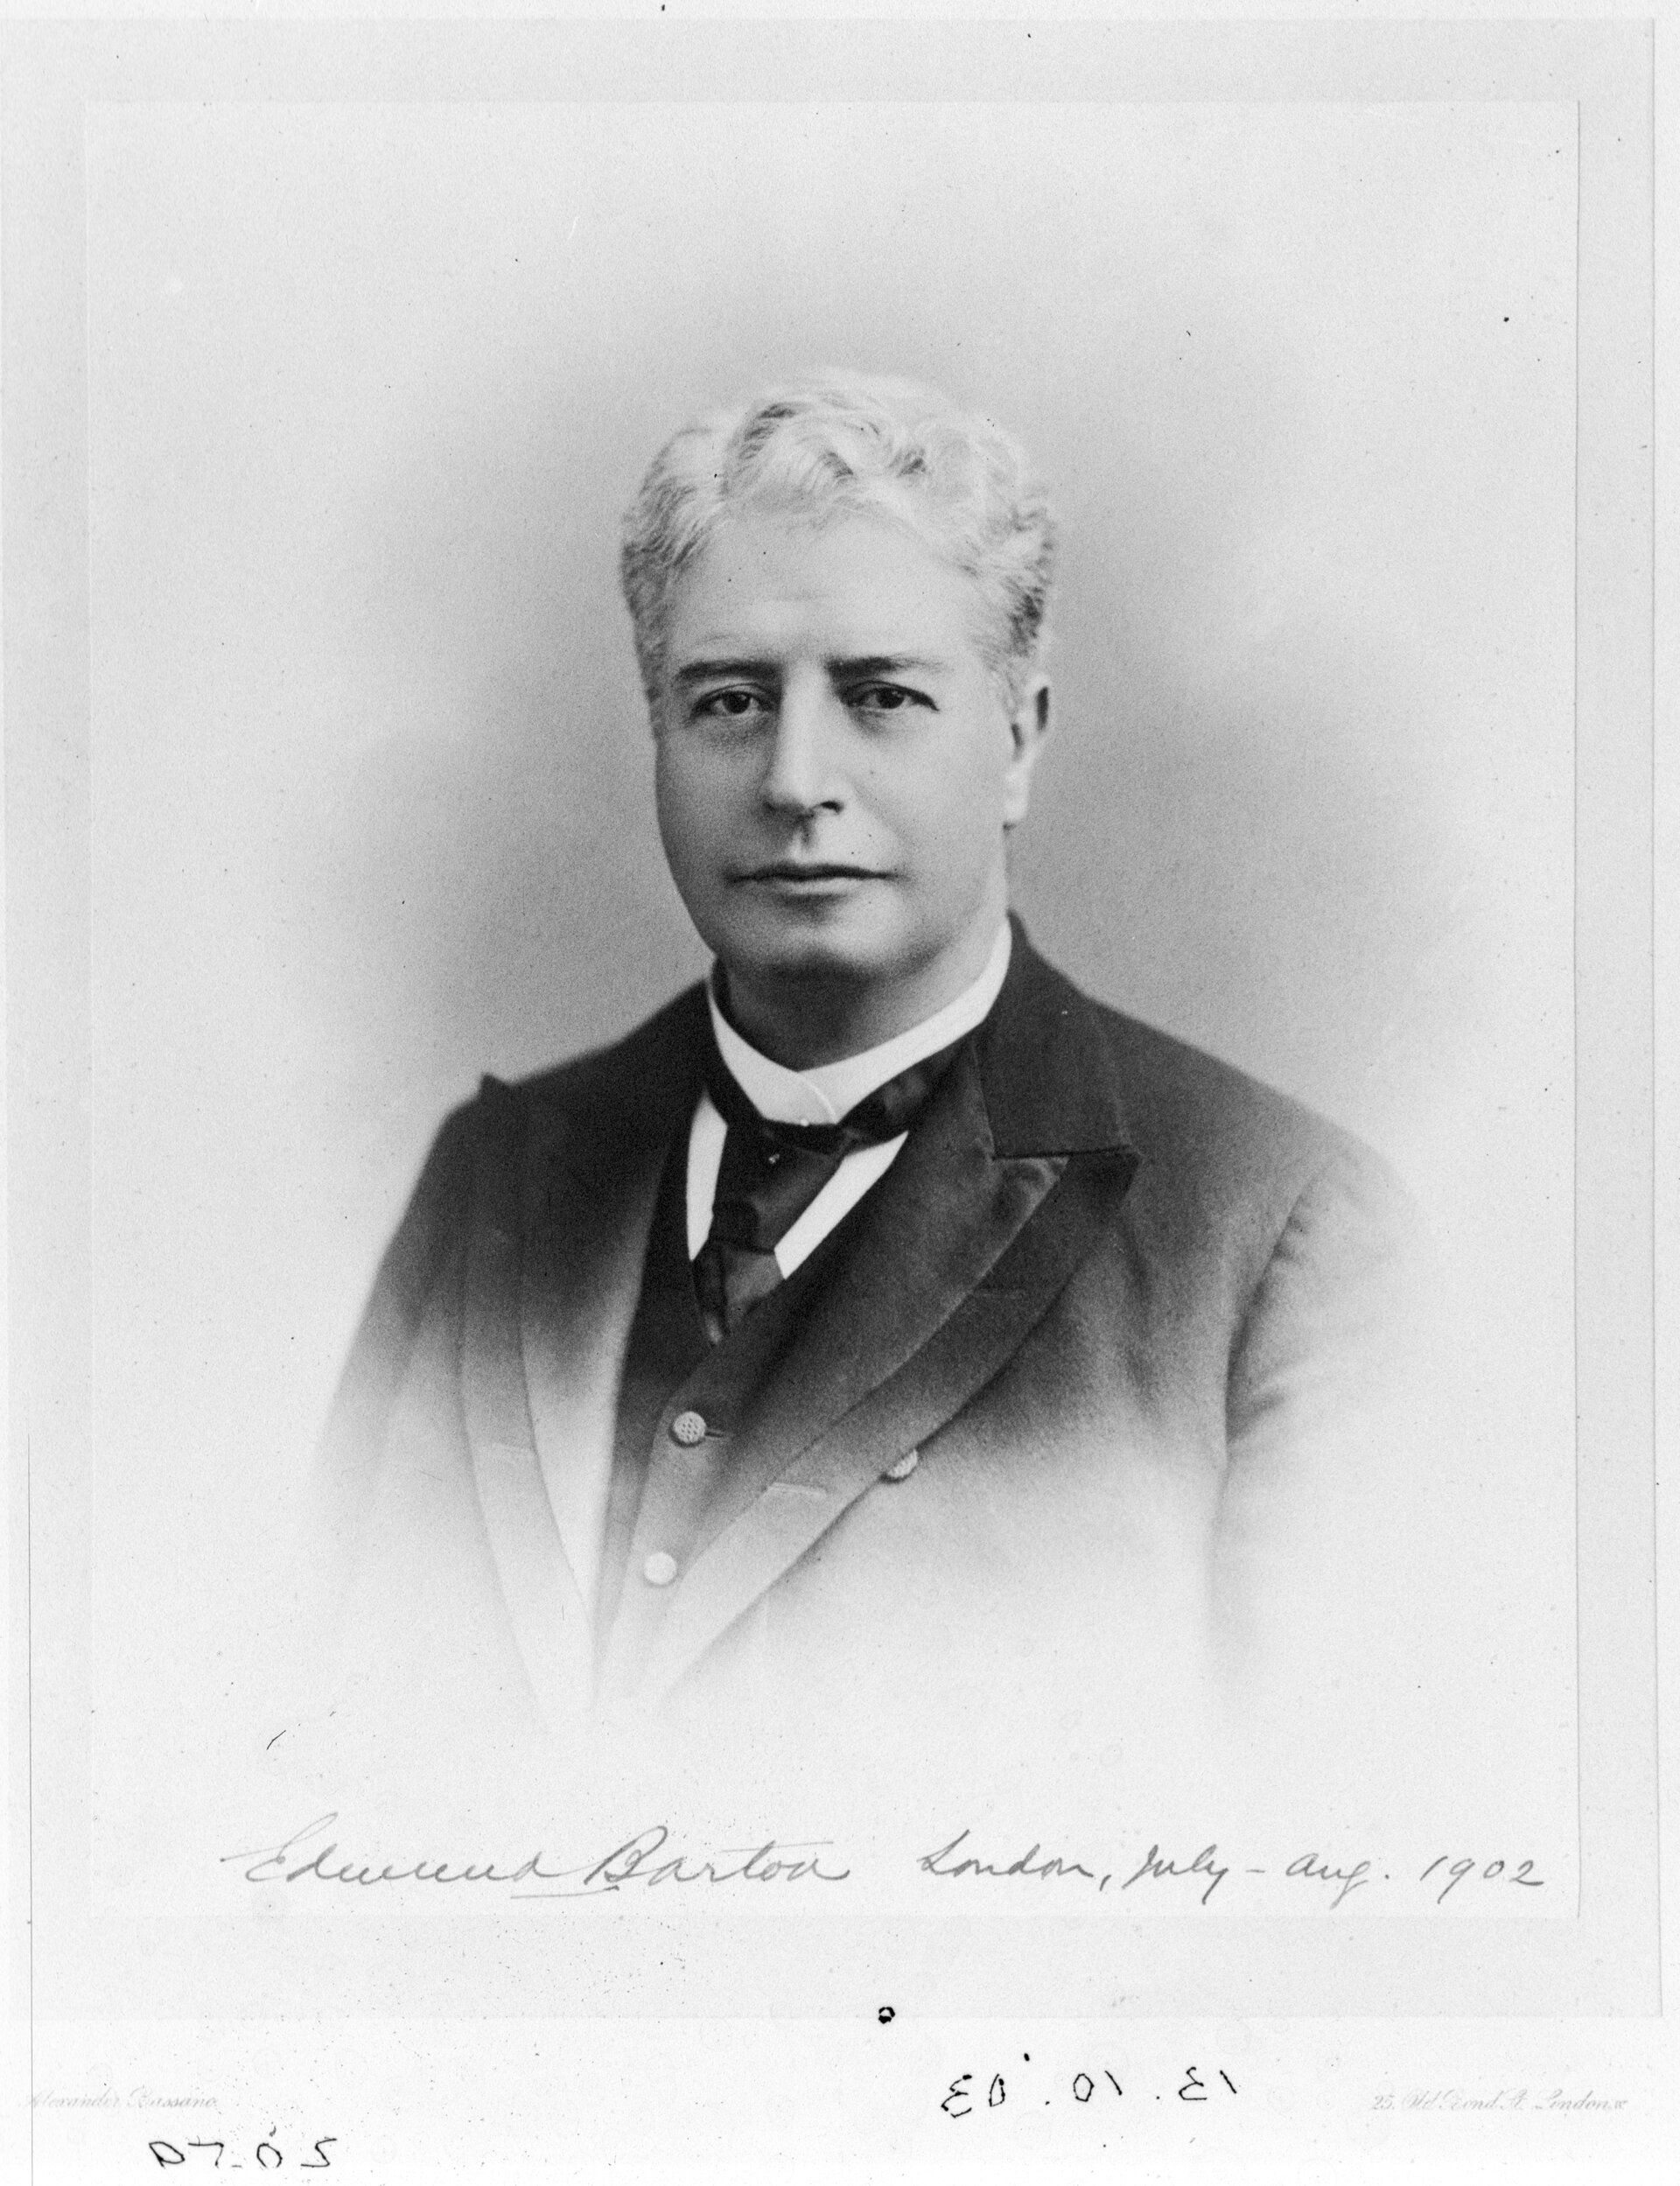 Portrait photo of a man in suit and tie